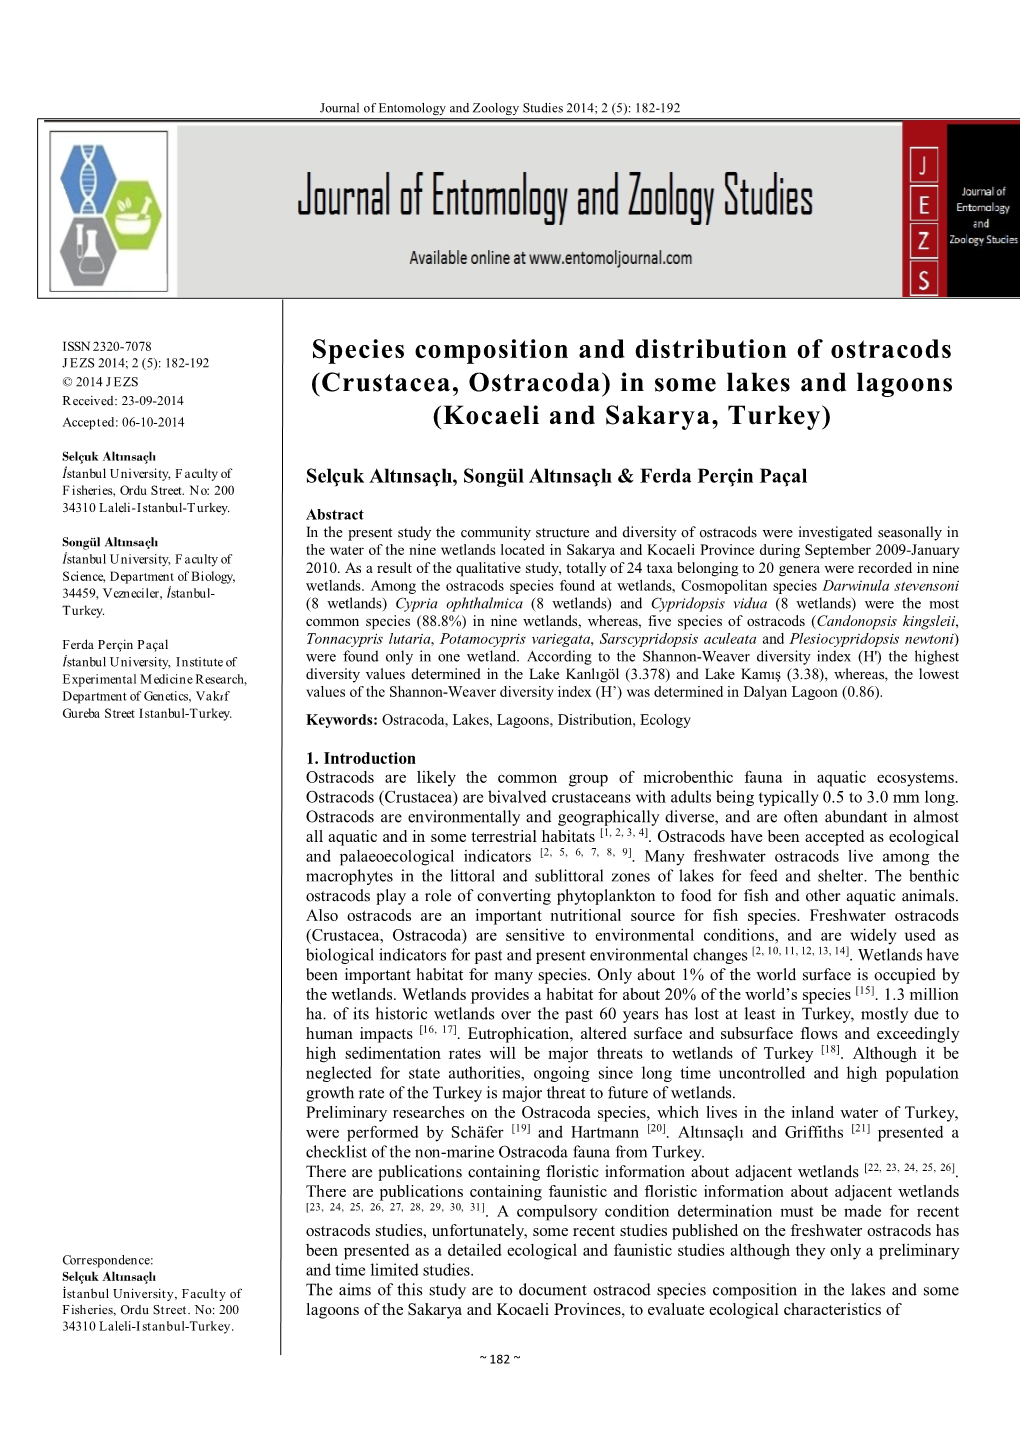 Species Composition and Distribution of Ostracods (Crustacea, Ostracoda) in Some Lakes and Lagoons (Kocaeli and Sakarya, Turkey)